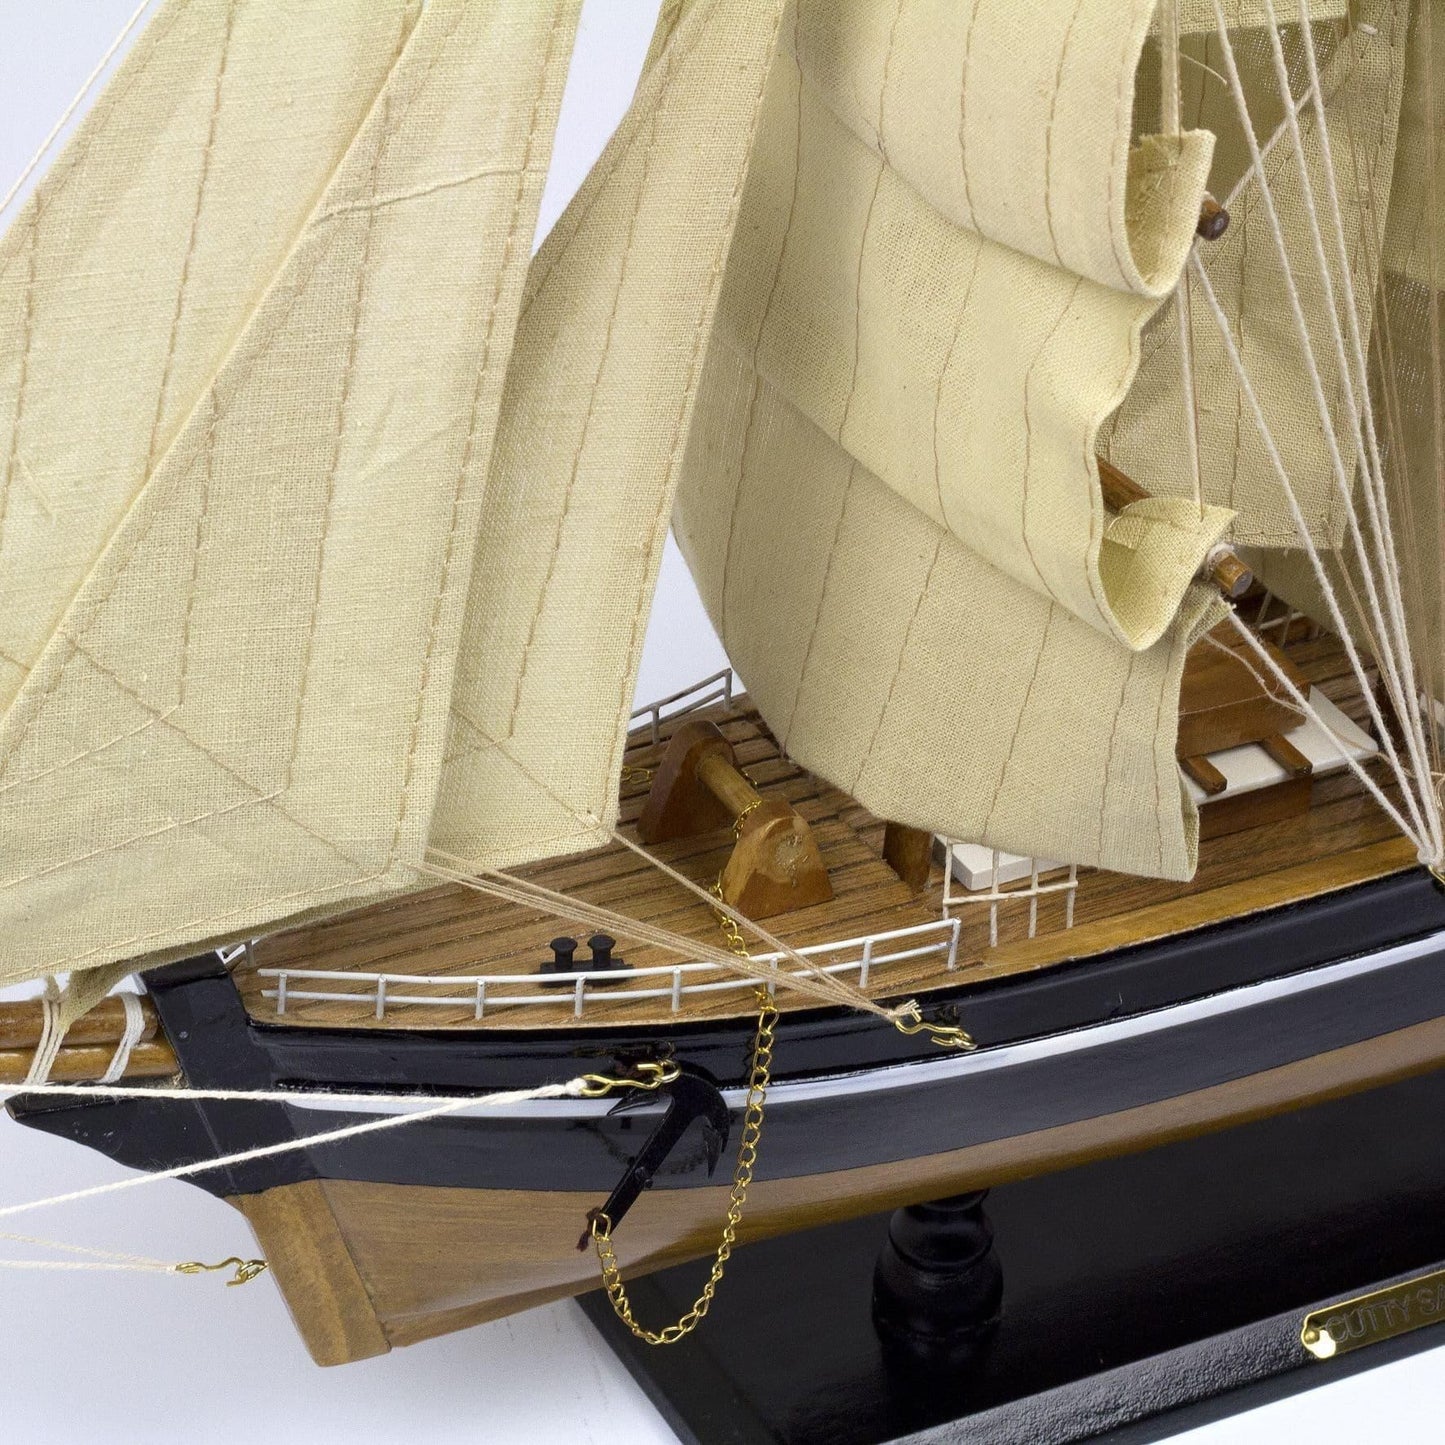 Cutty Sark Display Model Clipper Ship Assembled including Stand 55cm